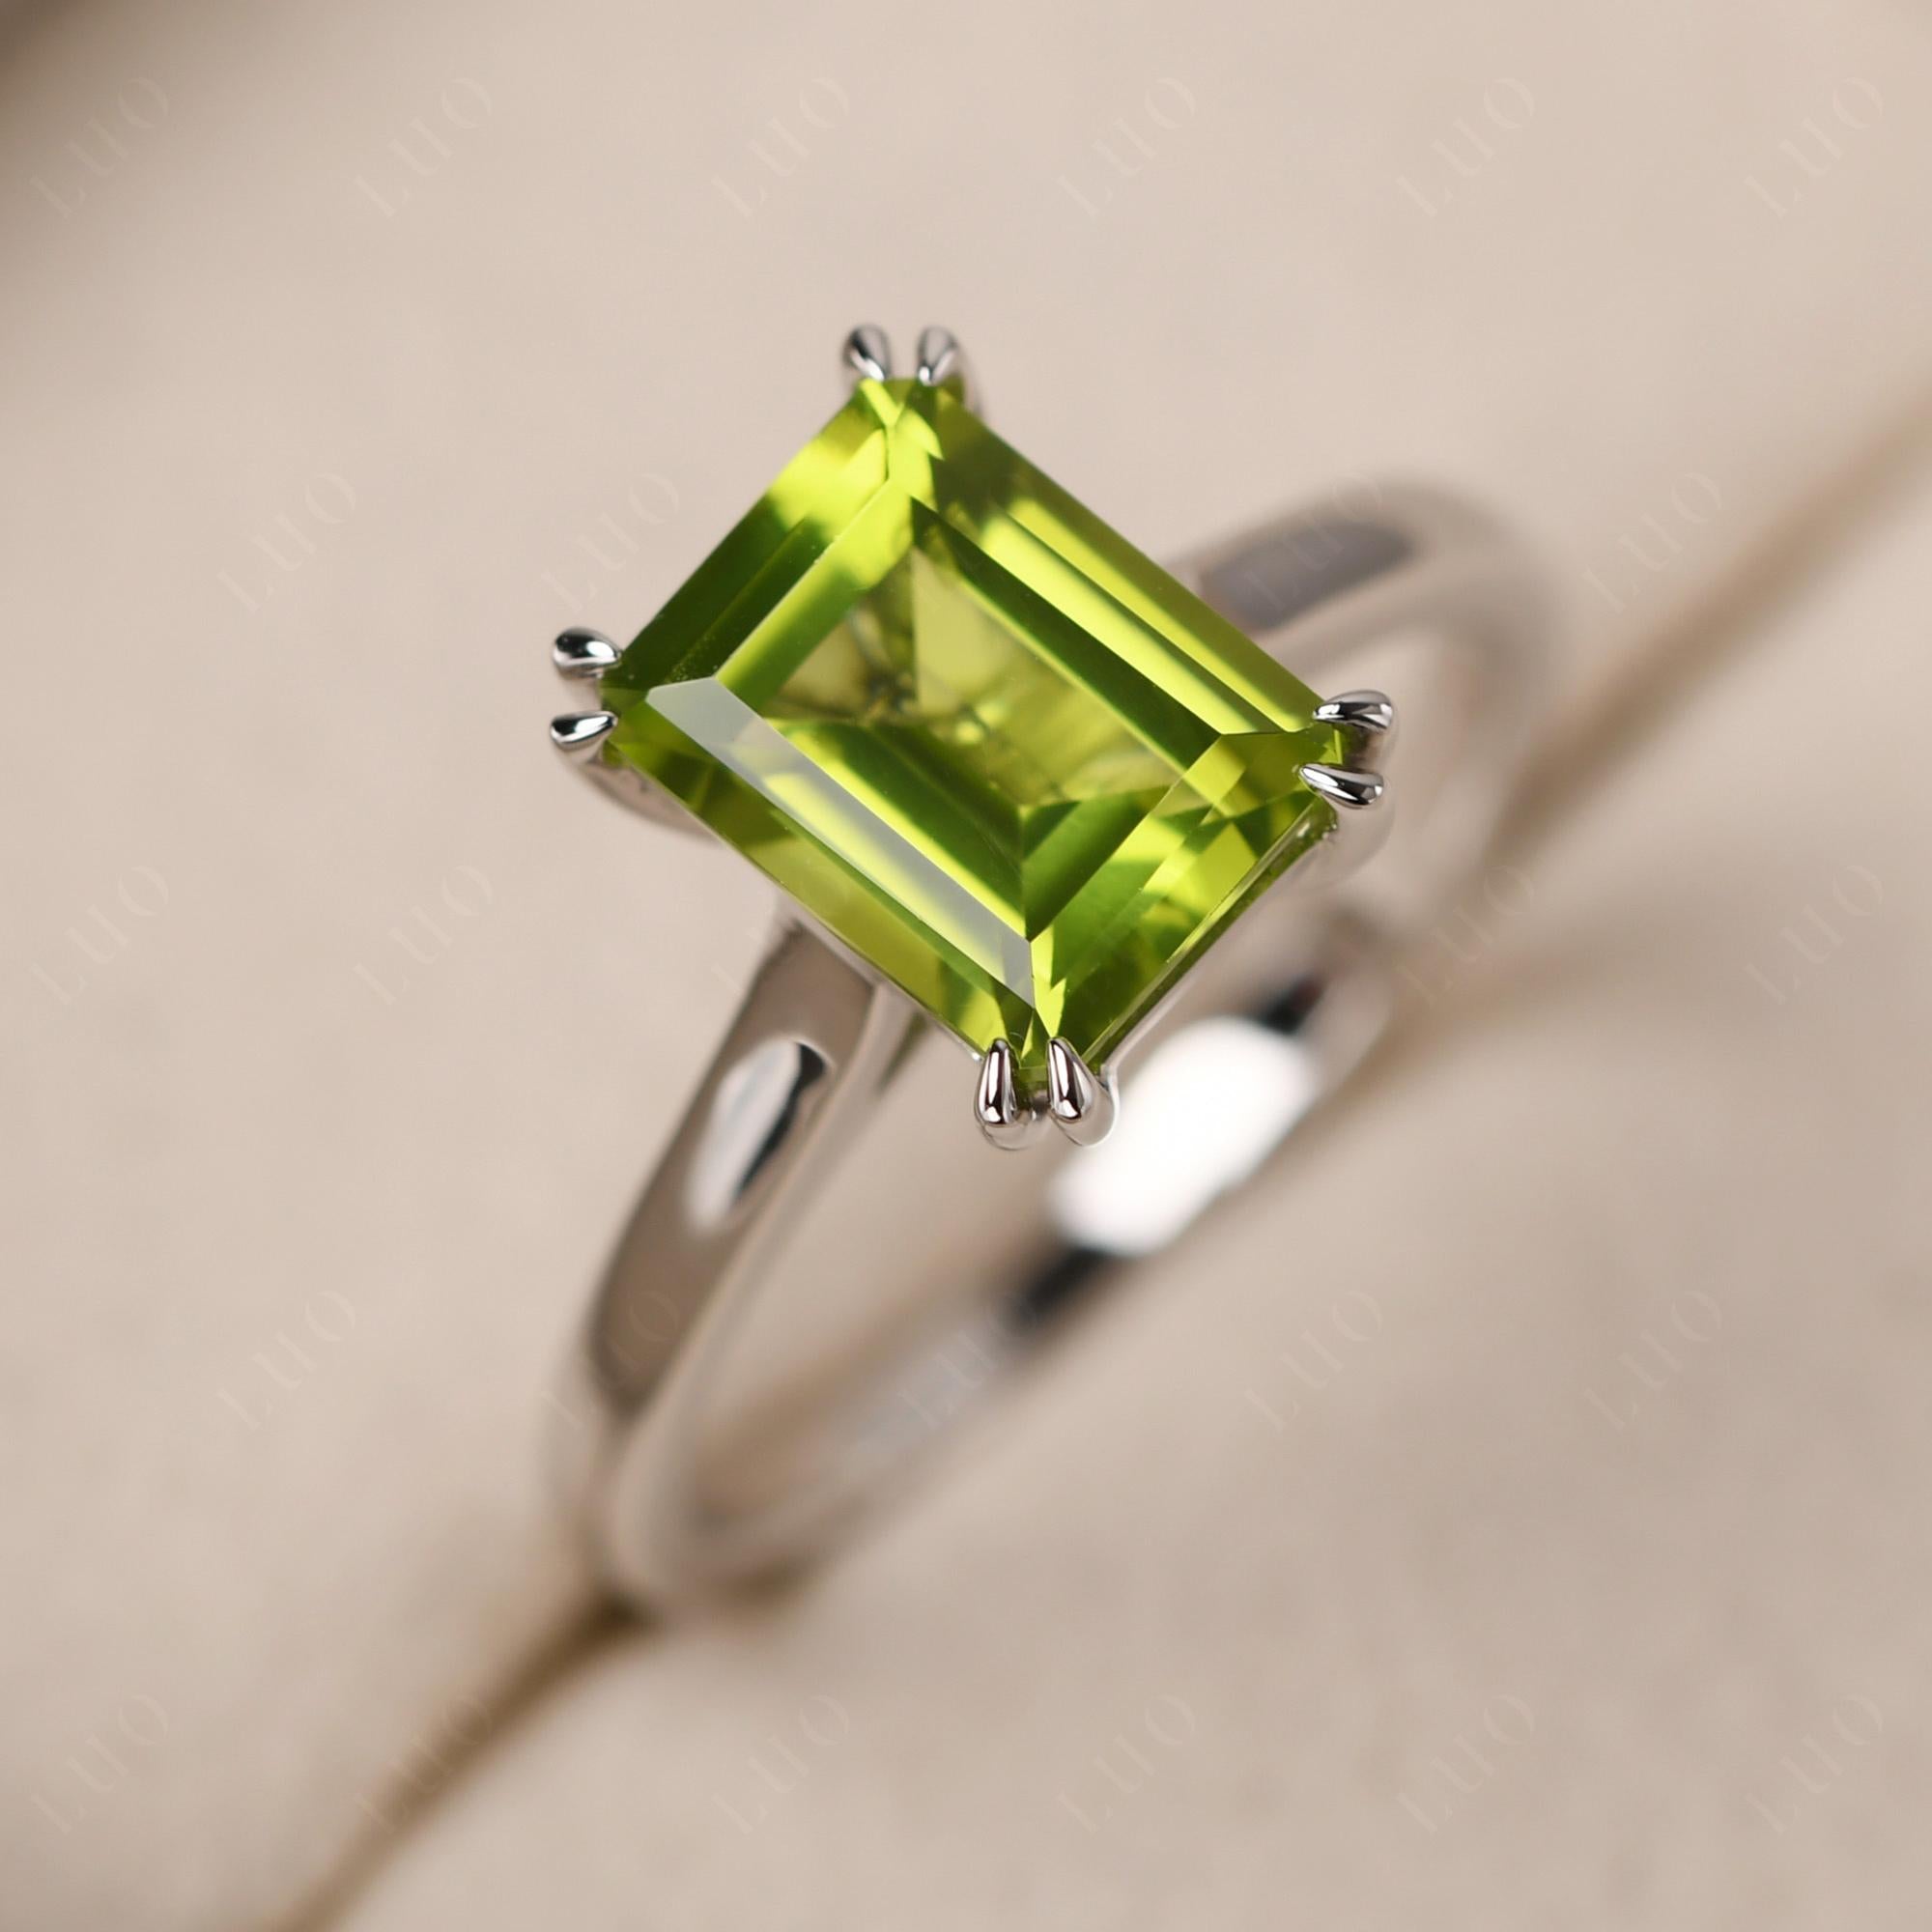 Emerald Cut Peridot Solitaire Wedding Ring - LUO Jewelry